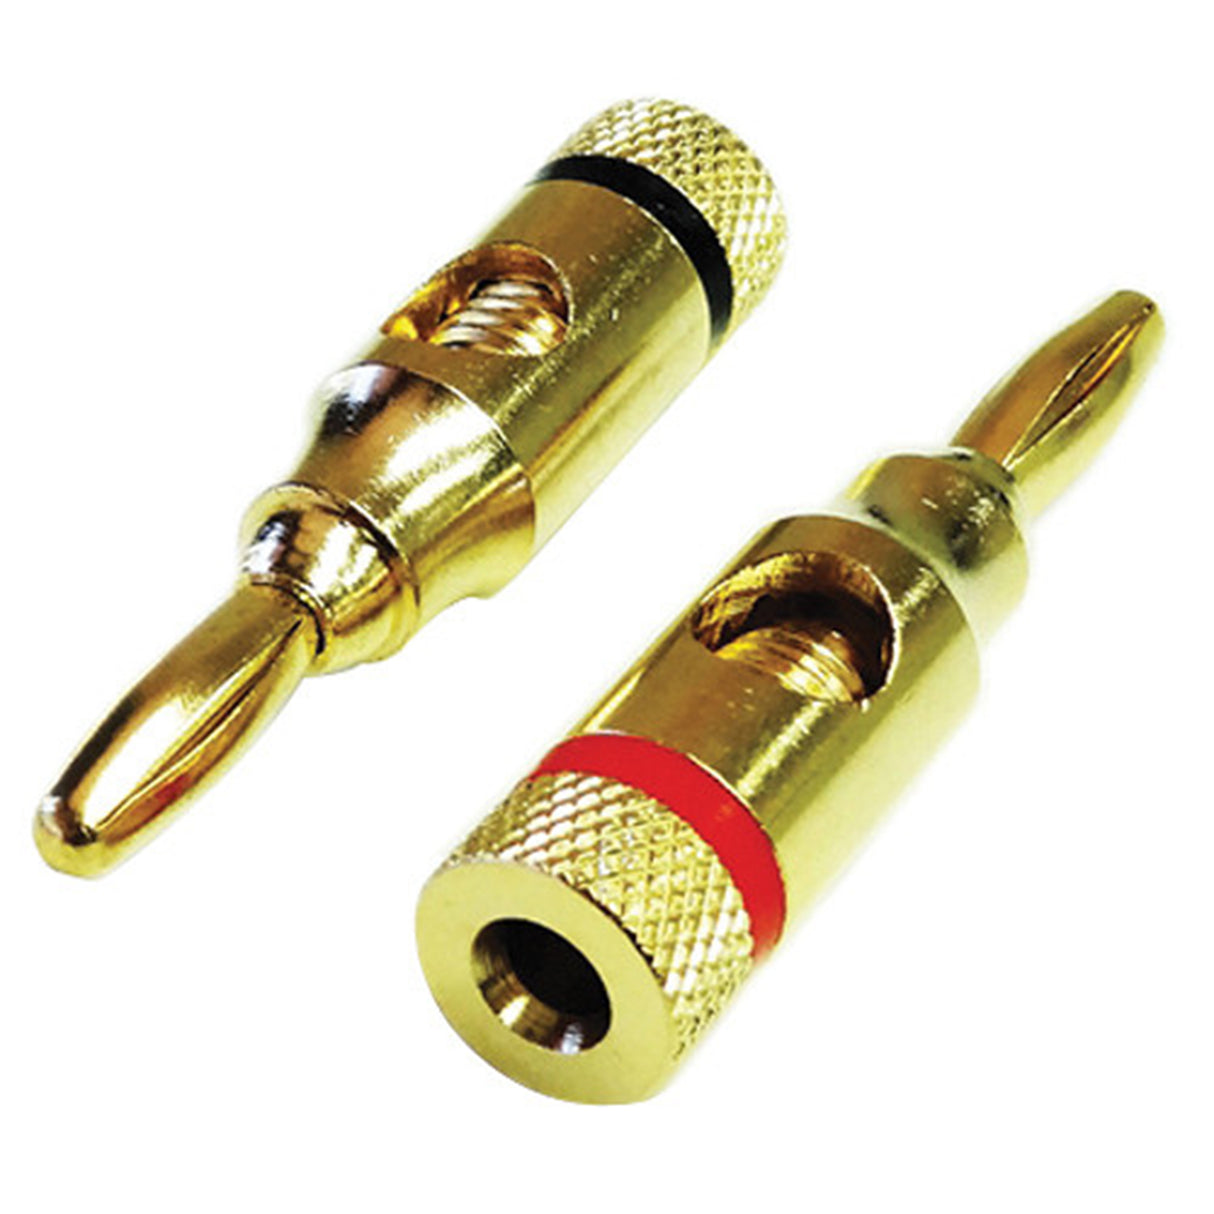 Connect Gold Plated Banana Plugs (Set of 4)